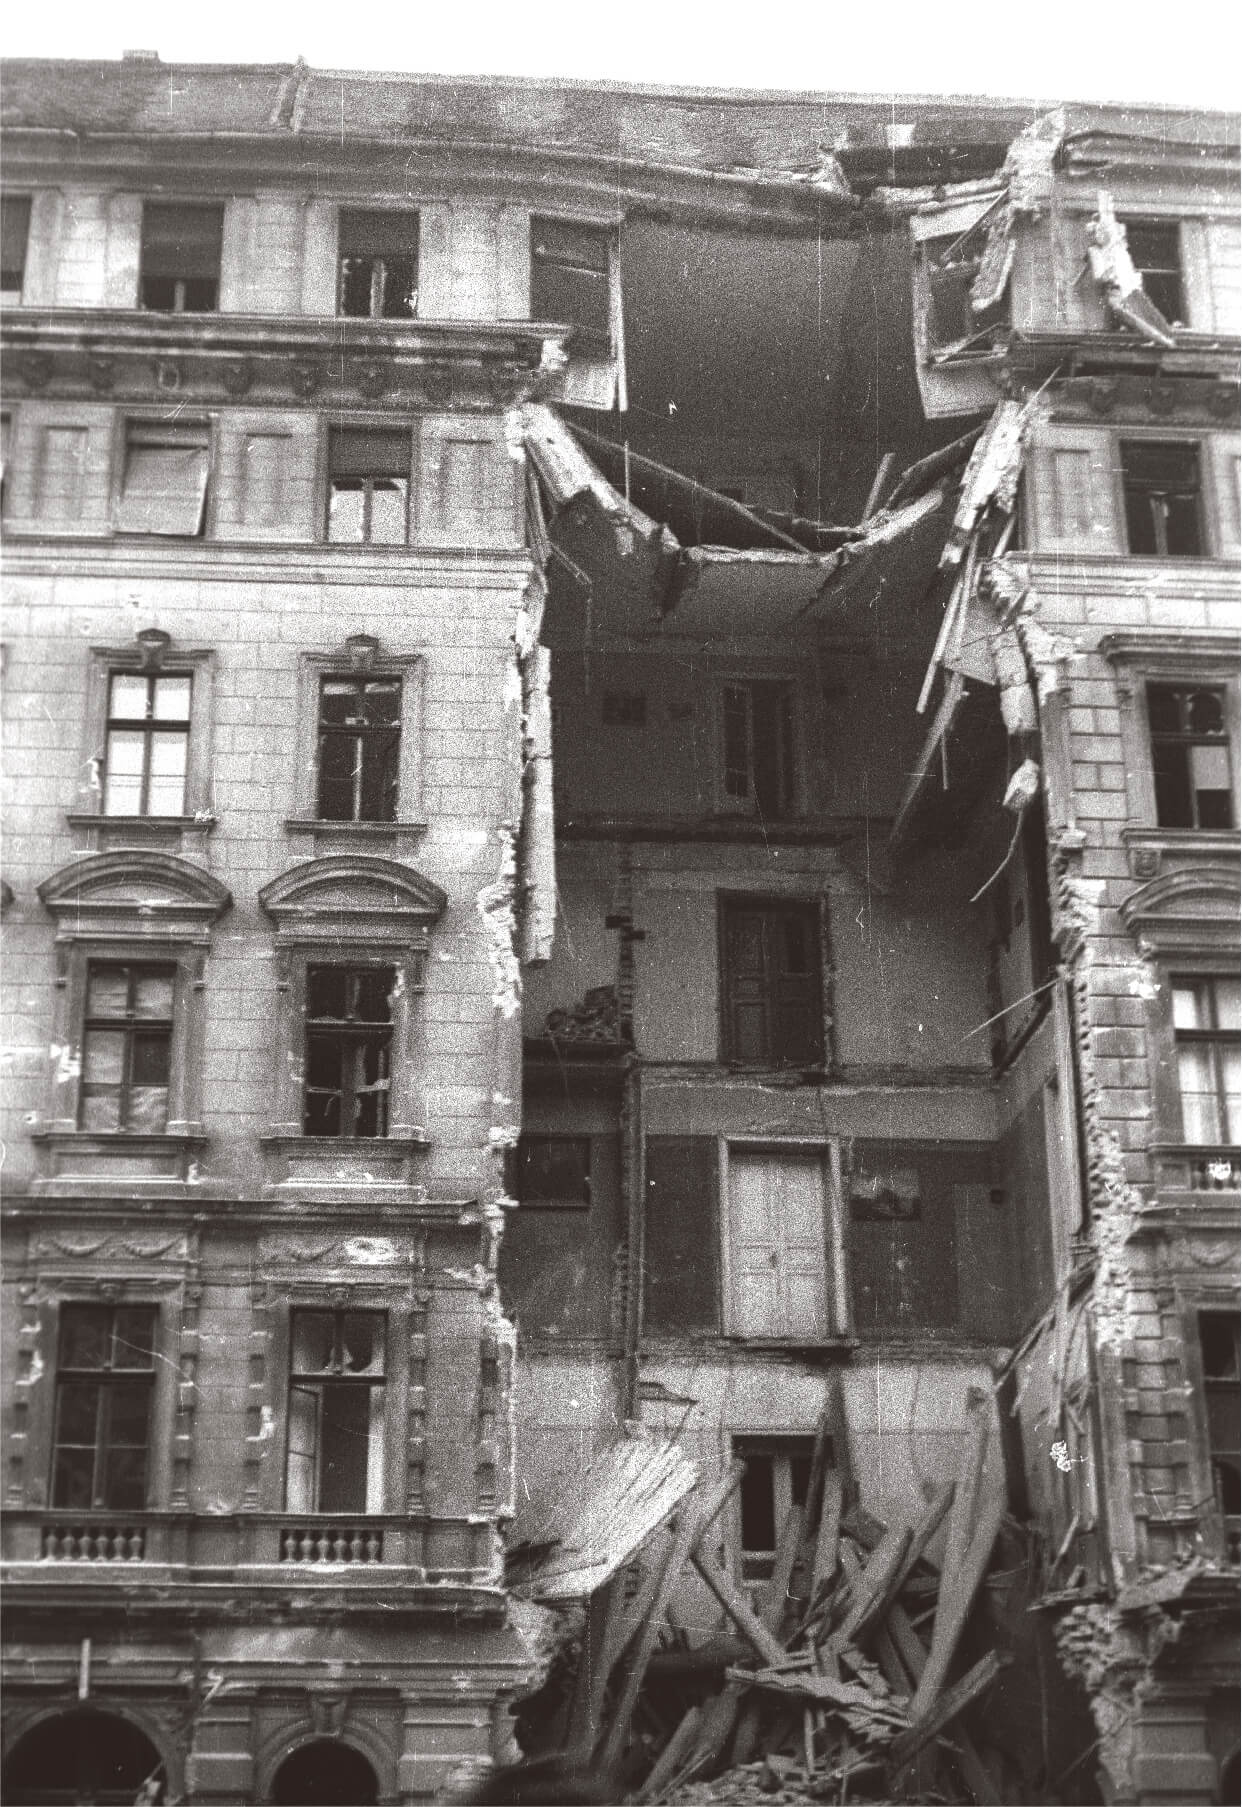 Bombed Budapest building in 1956